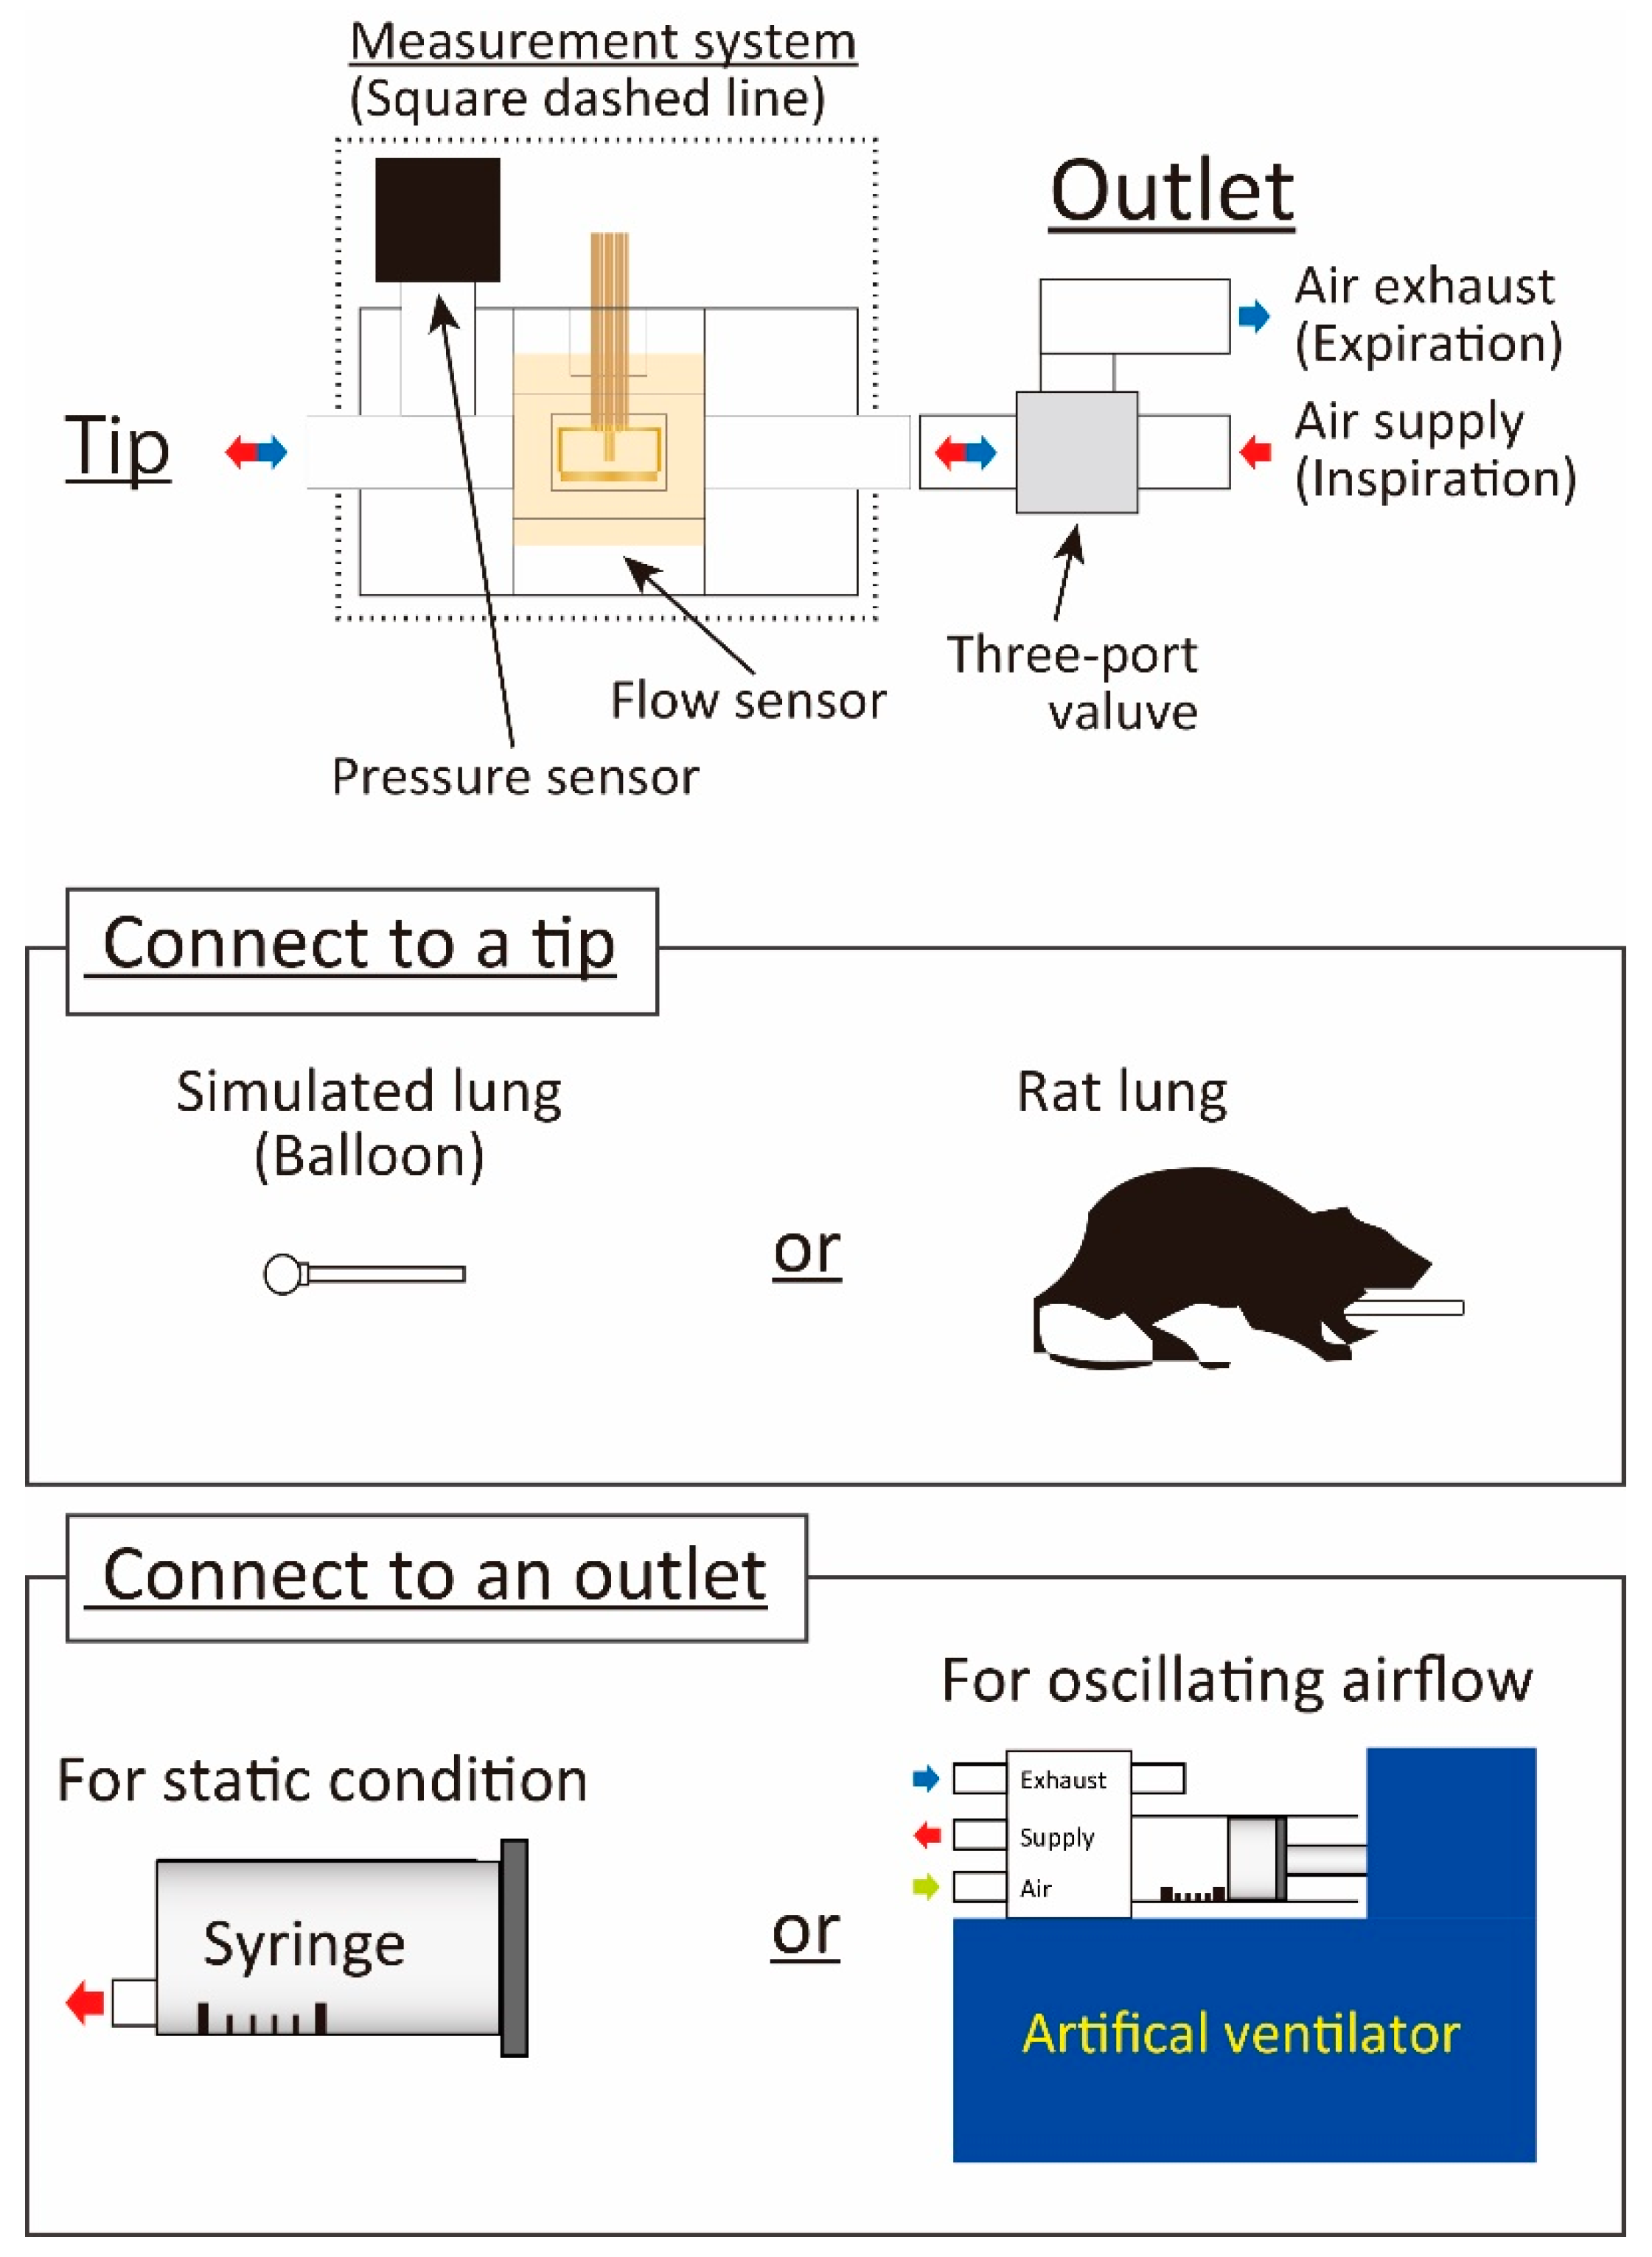 Sensors | Free Full-Text | Miniaturization of Respiratory Measurement  System in Artificial Ventilator for Small Animal Experiments to Reduce Dead  Space and Its Application to Lung Elasticity Evaluation